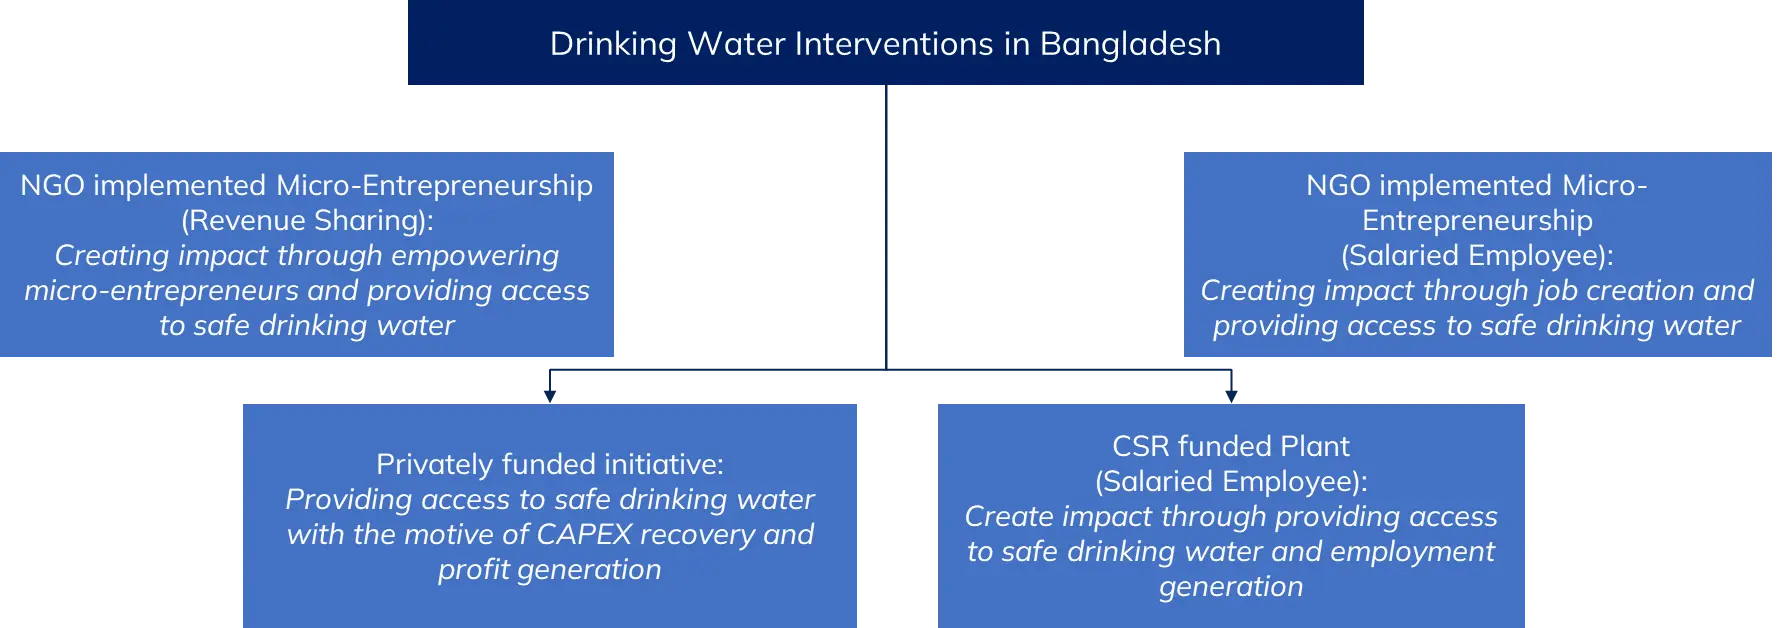 Drinking water interventions in Bangladesh